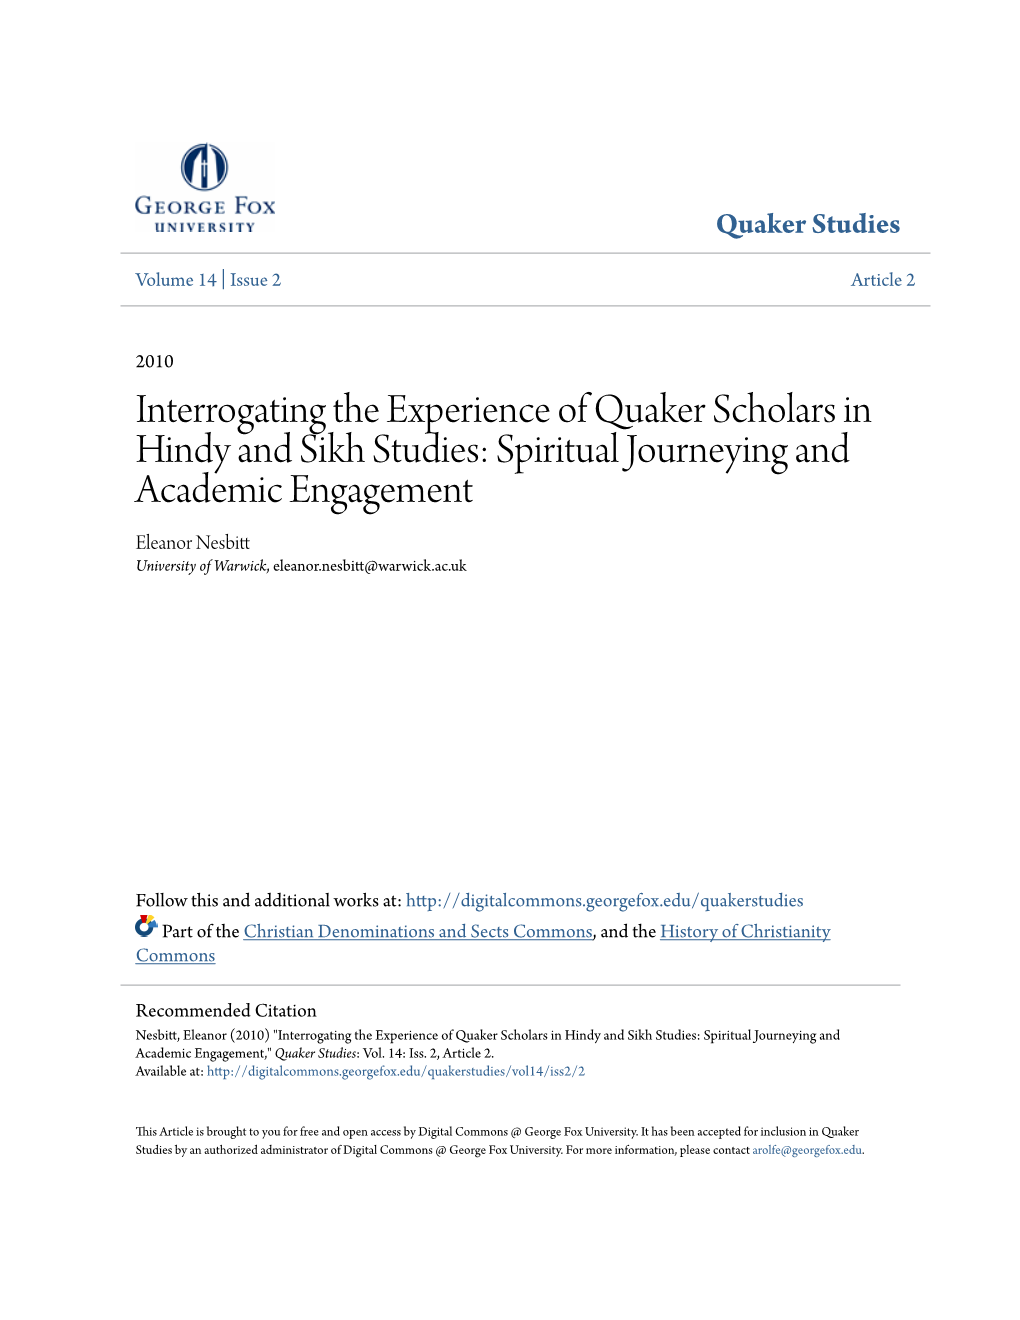 Interrogating the Experience of Quaker Scholars in Hindy and Sikh